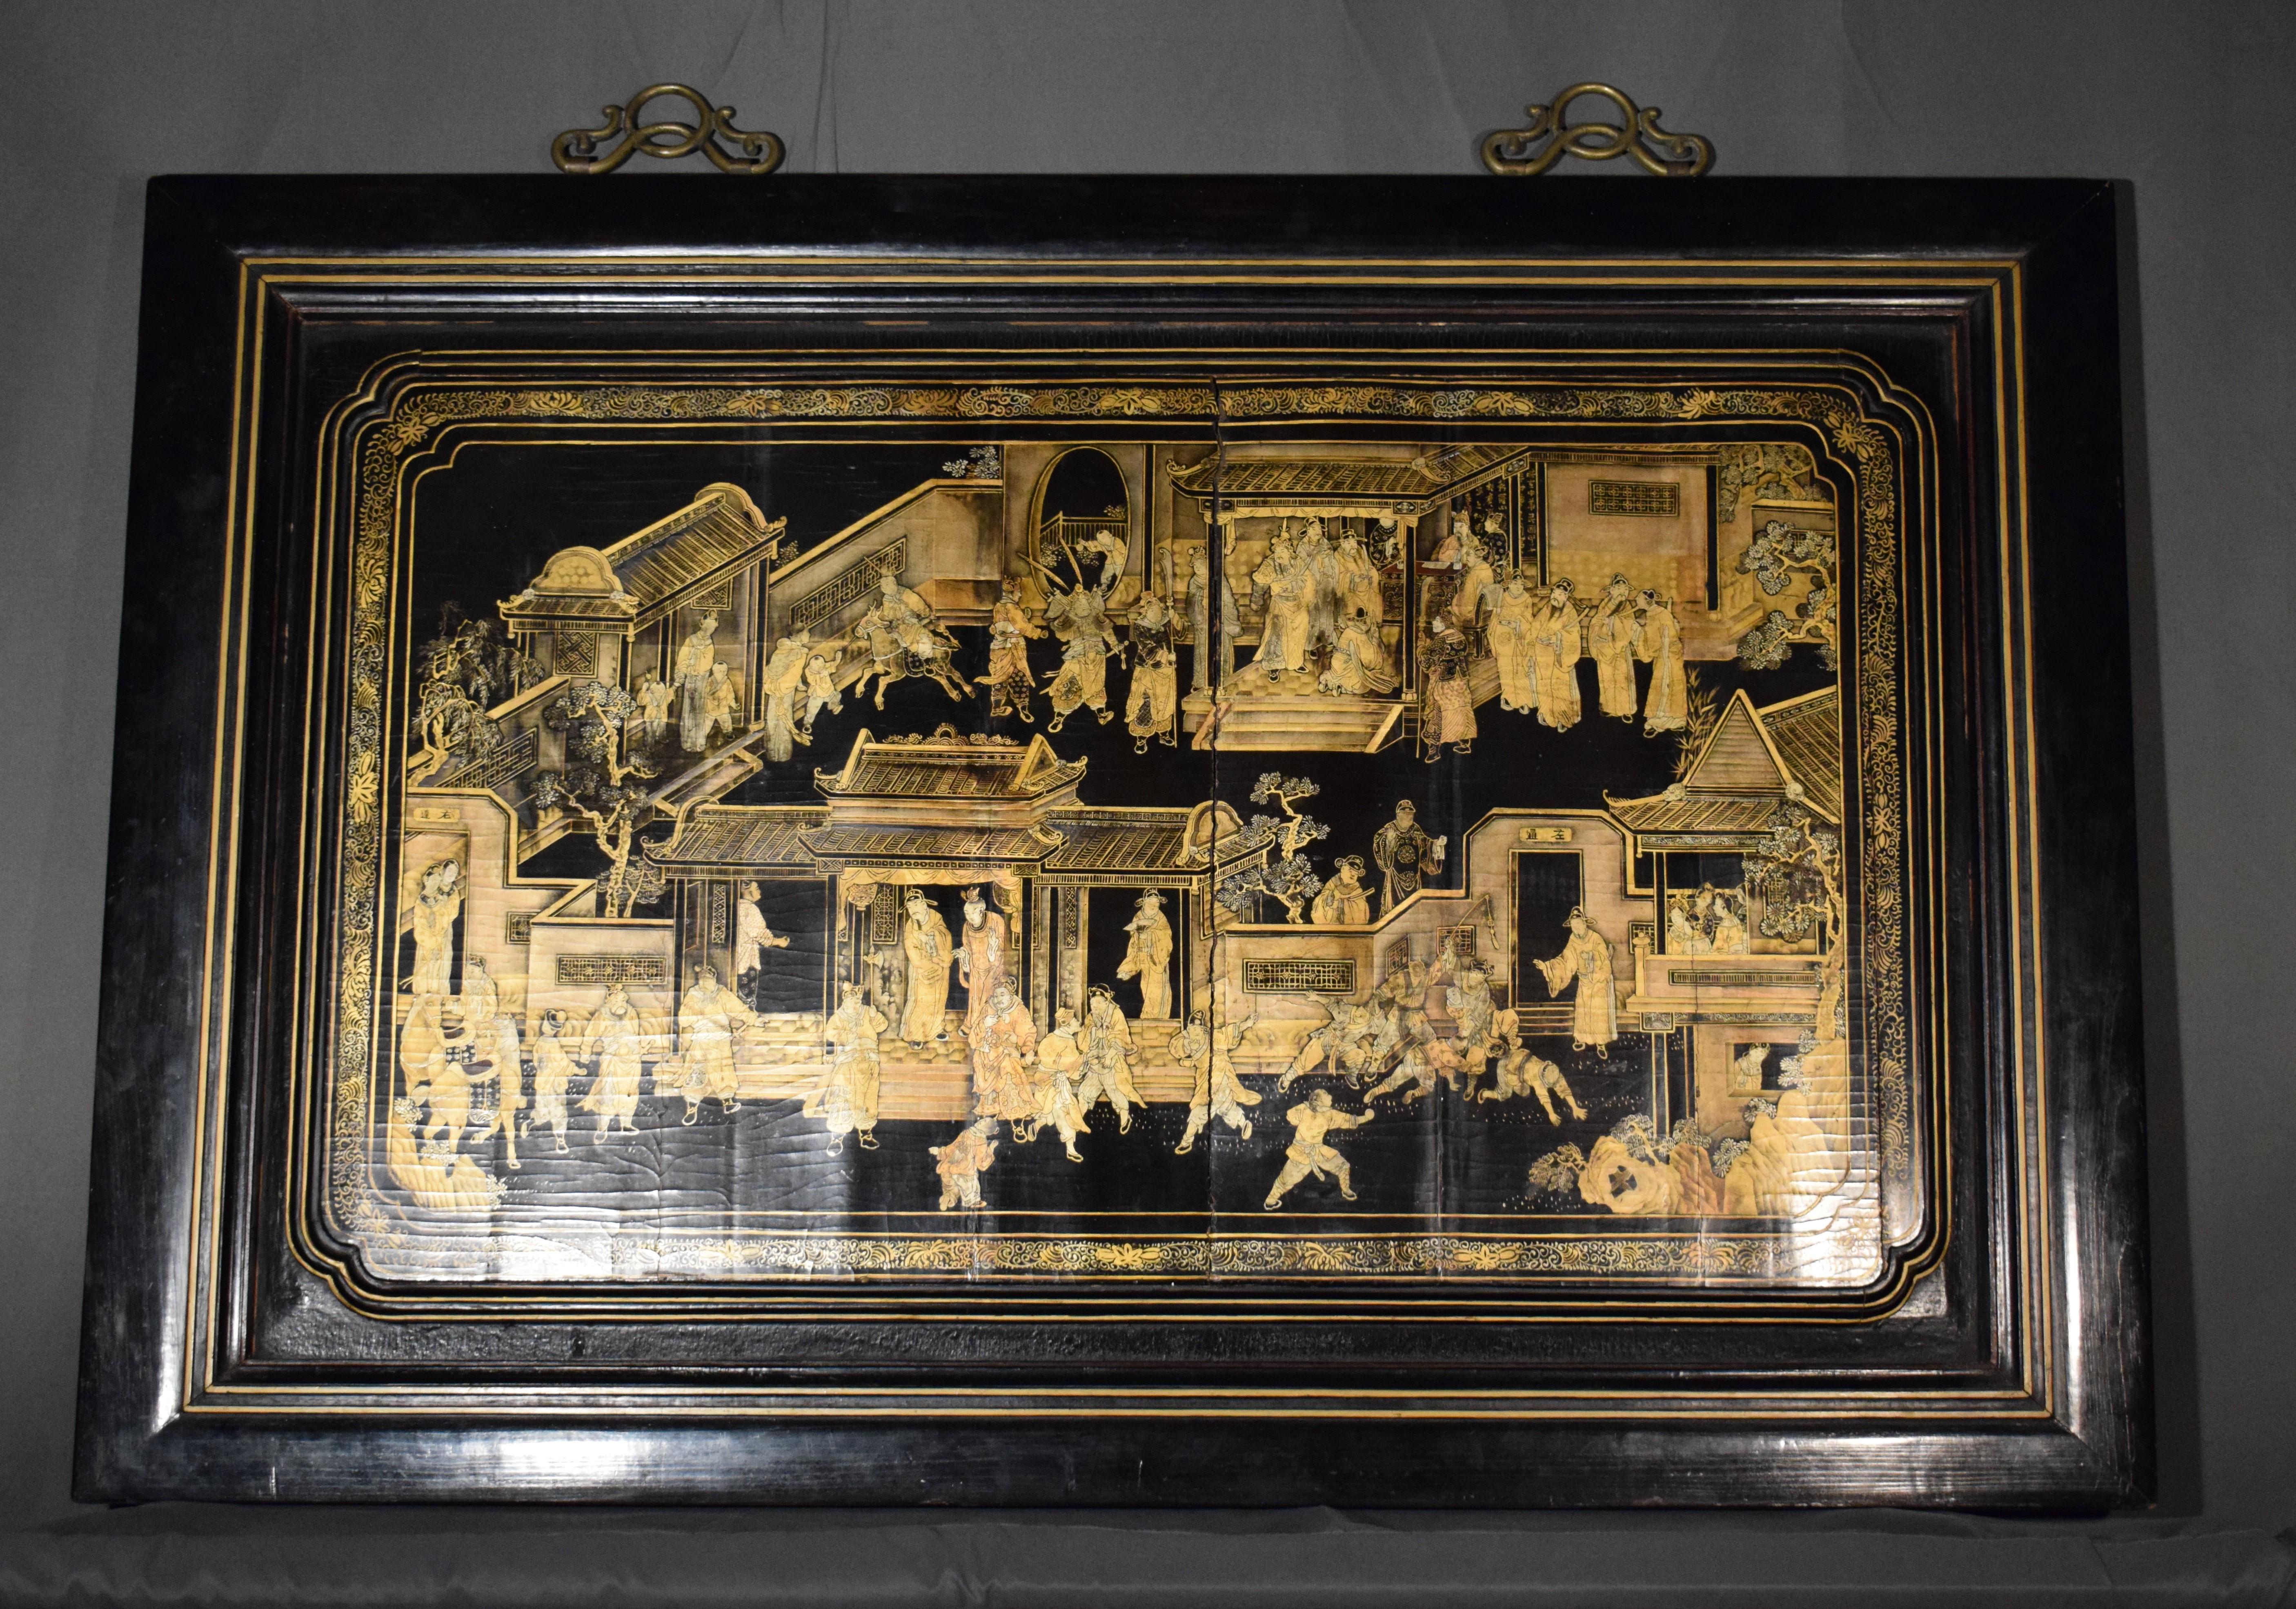 A Chinese export gilt-decorated black lacquer panel
19th century
The rectangular panel with inset rounded corners, finely decorated with figures at various pursuits on a black ground, mounted in an ebonized wood frame.
Dimensions of panel 28 x 46